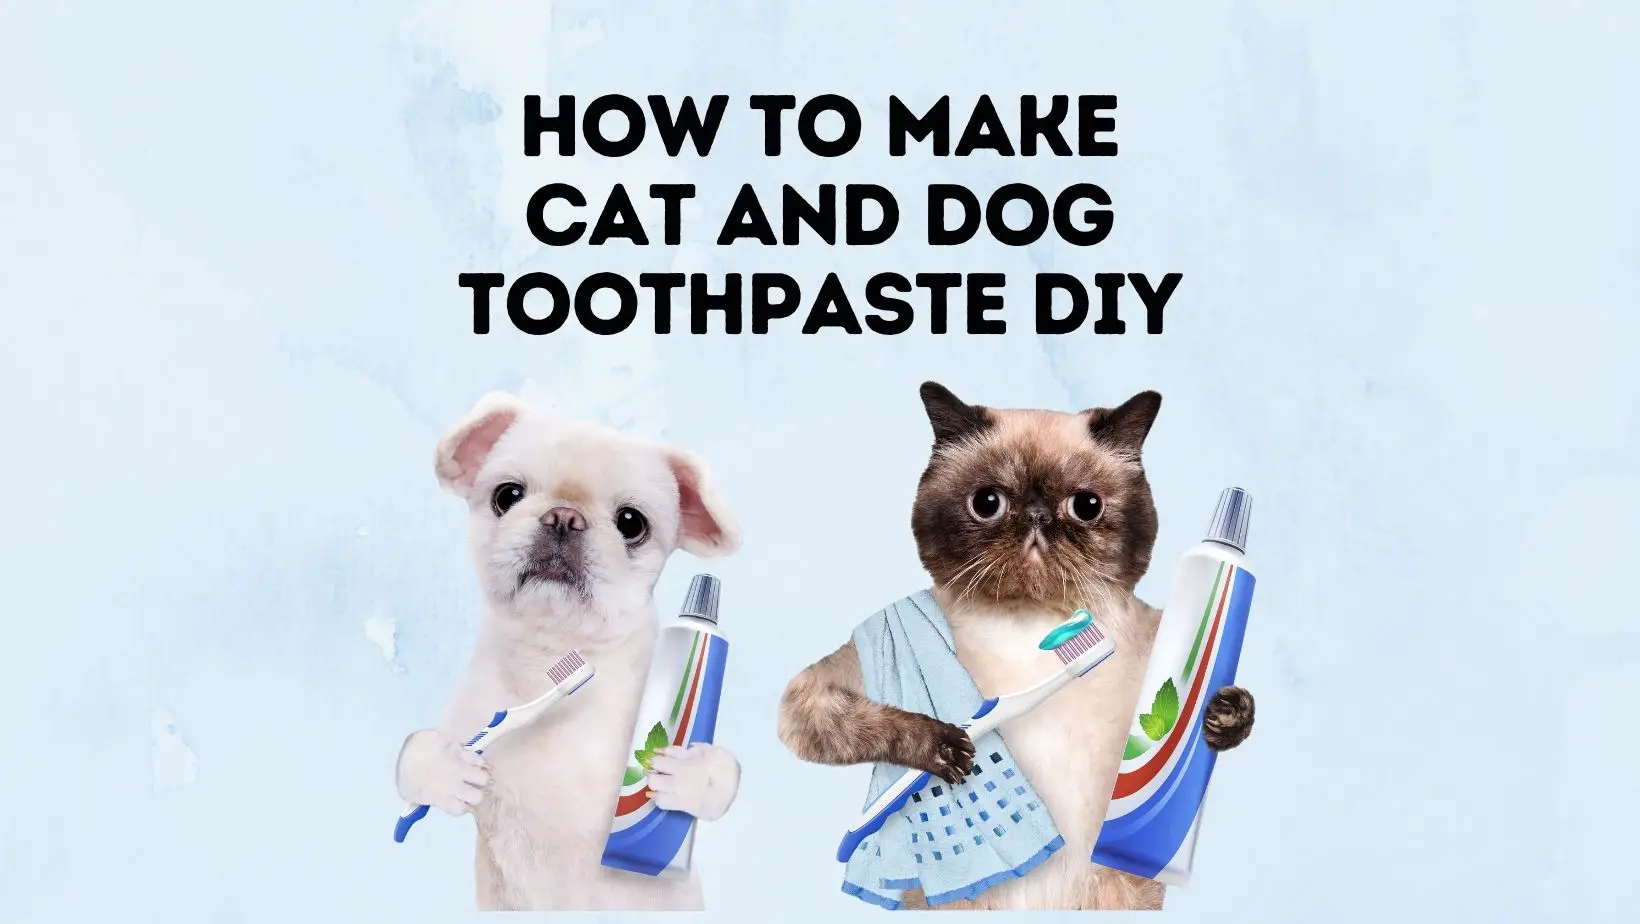 How To Make Cat and Dog Toothpaste